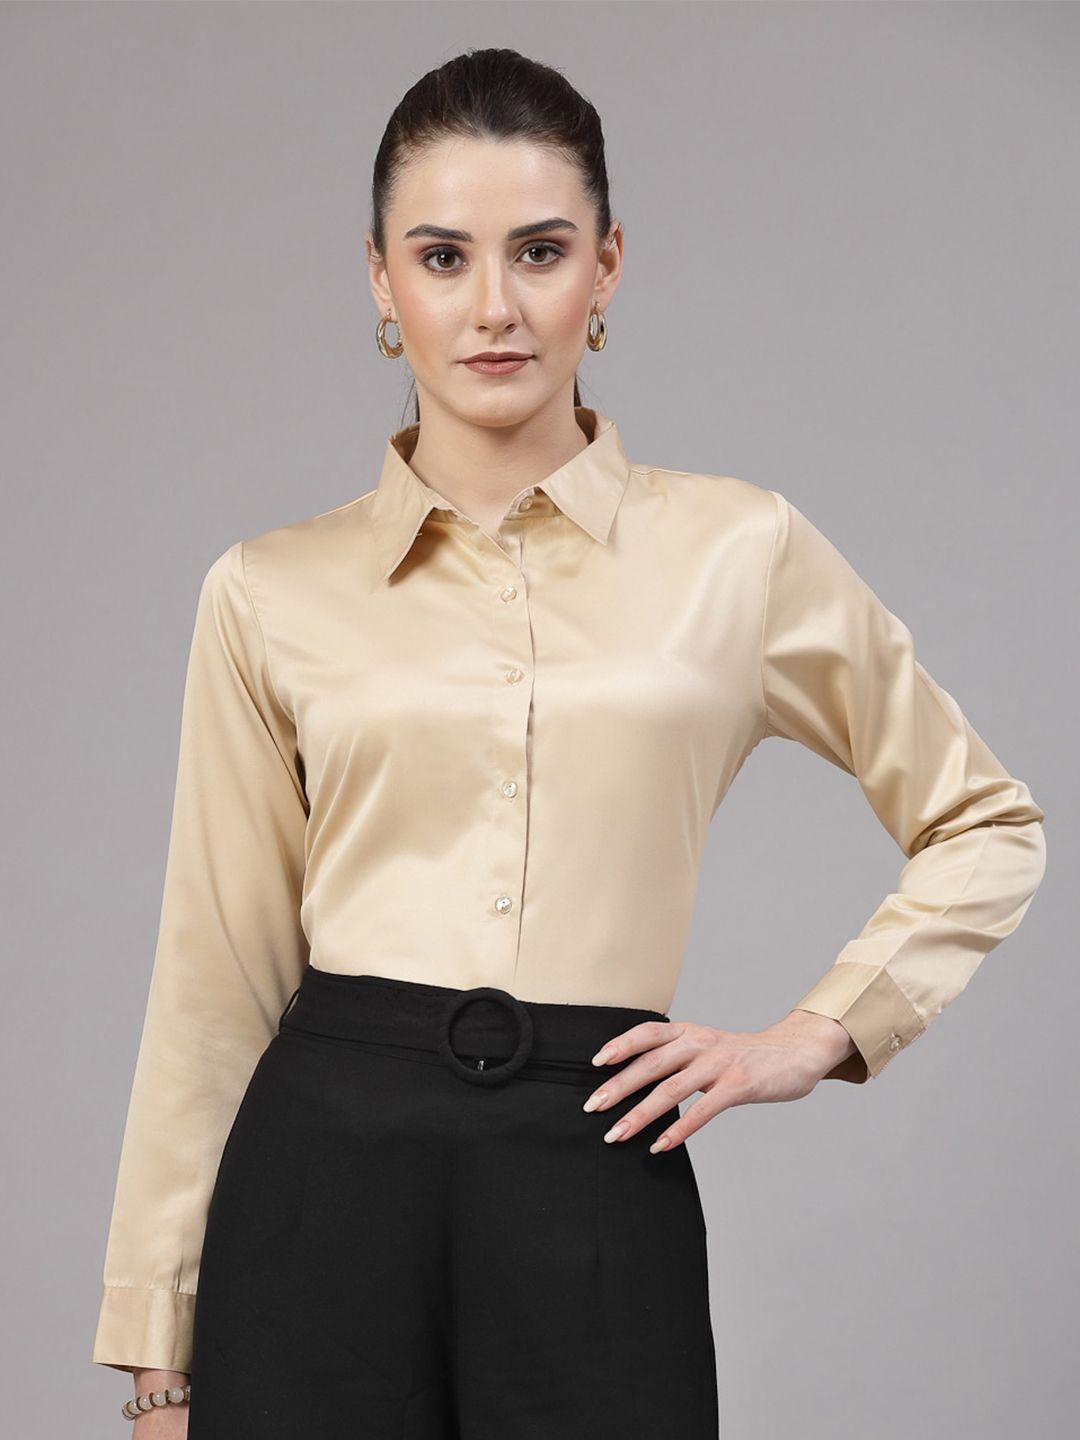 style quotient champagne smart spread collar satin formal shirt